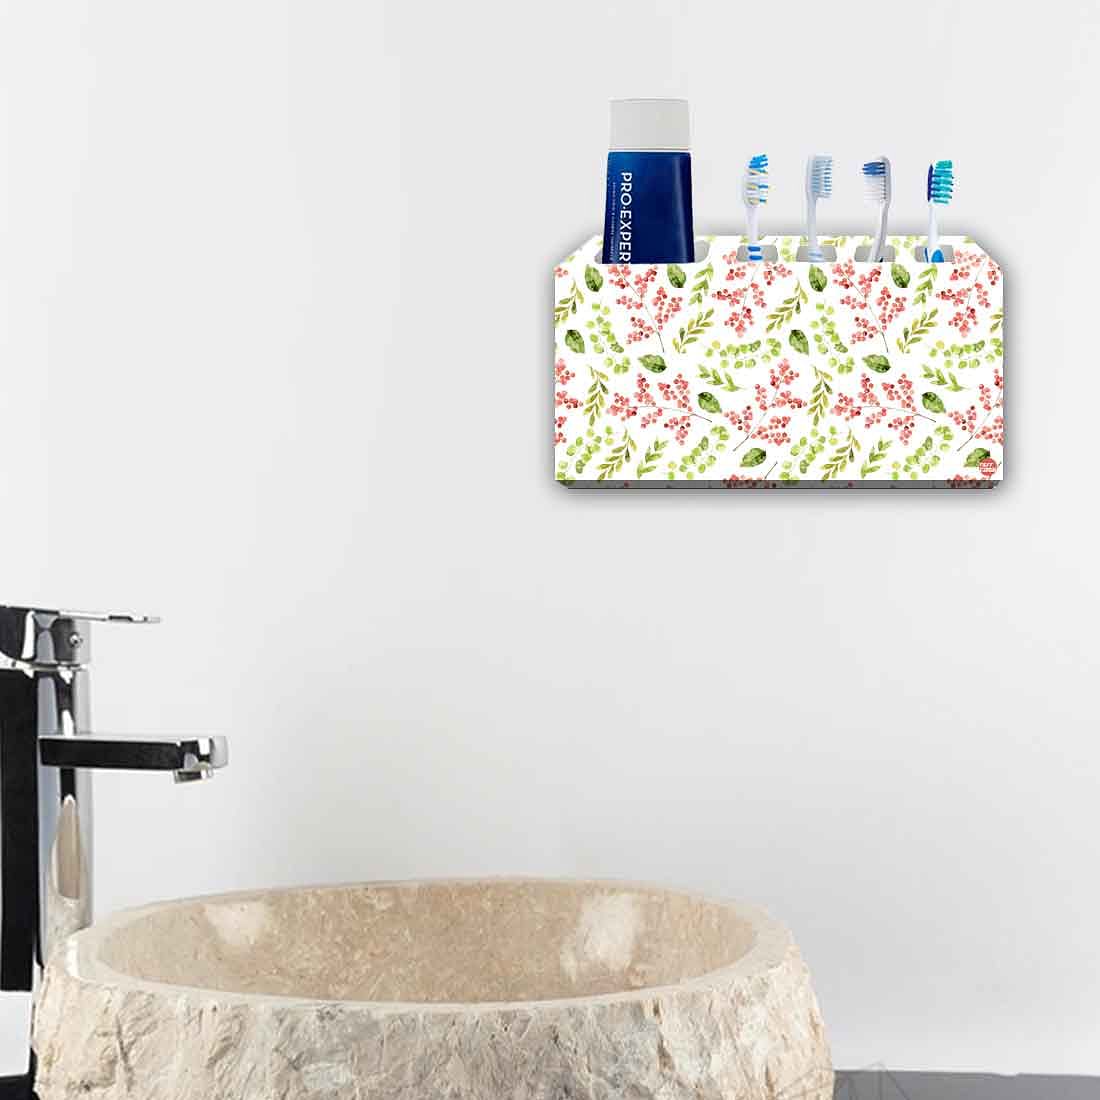 Toothbrush Holder Wall Mounted -Dotted Flowers Nutcase